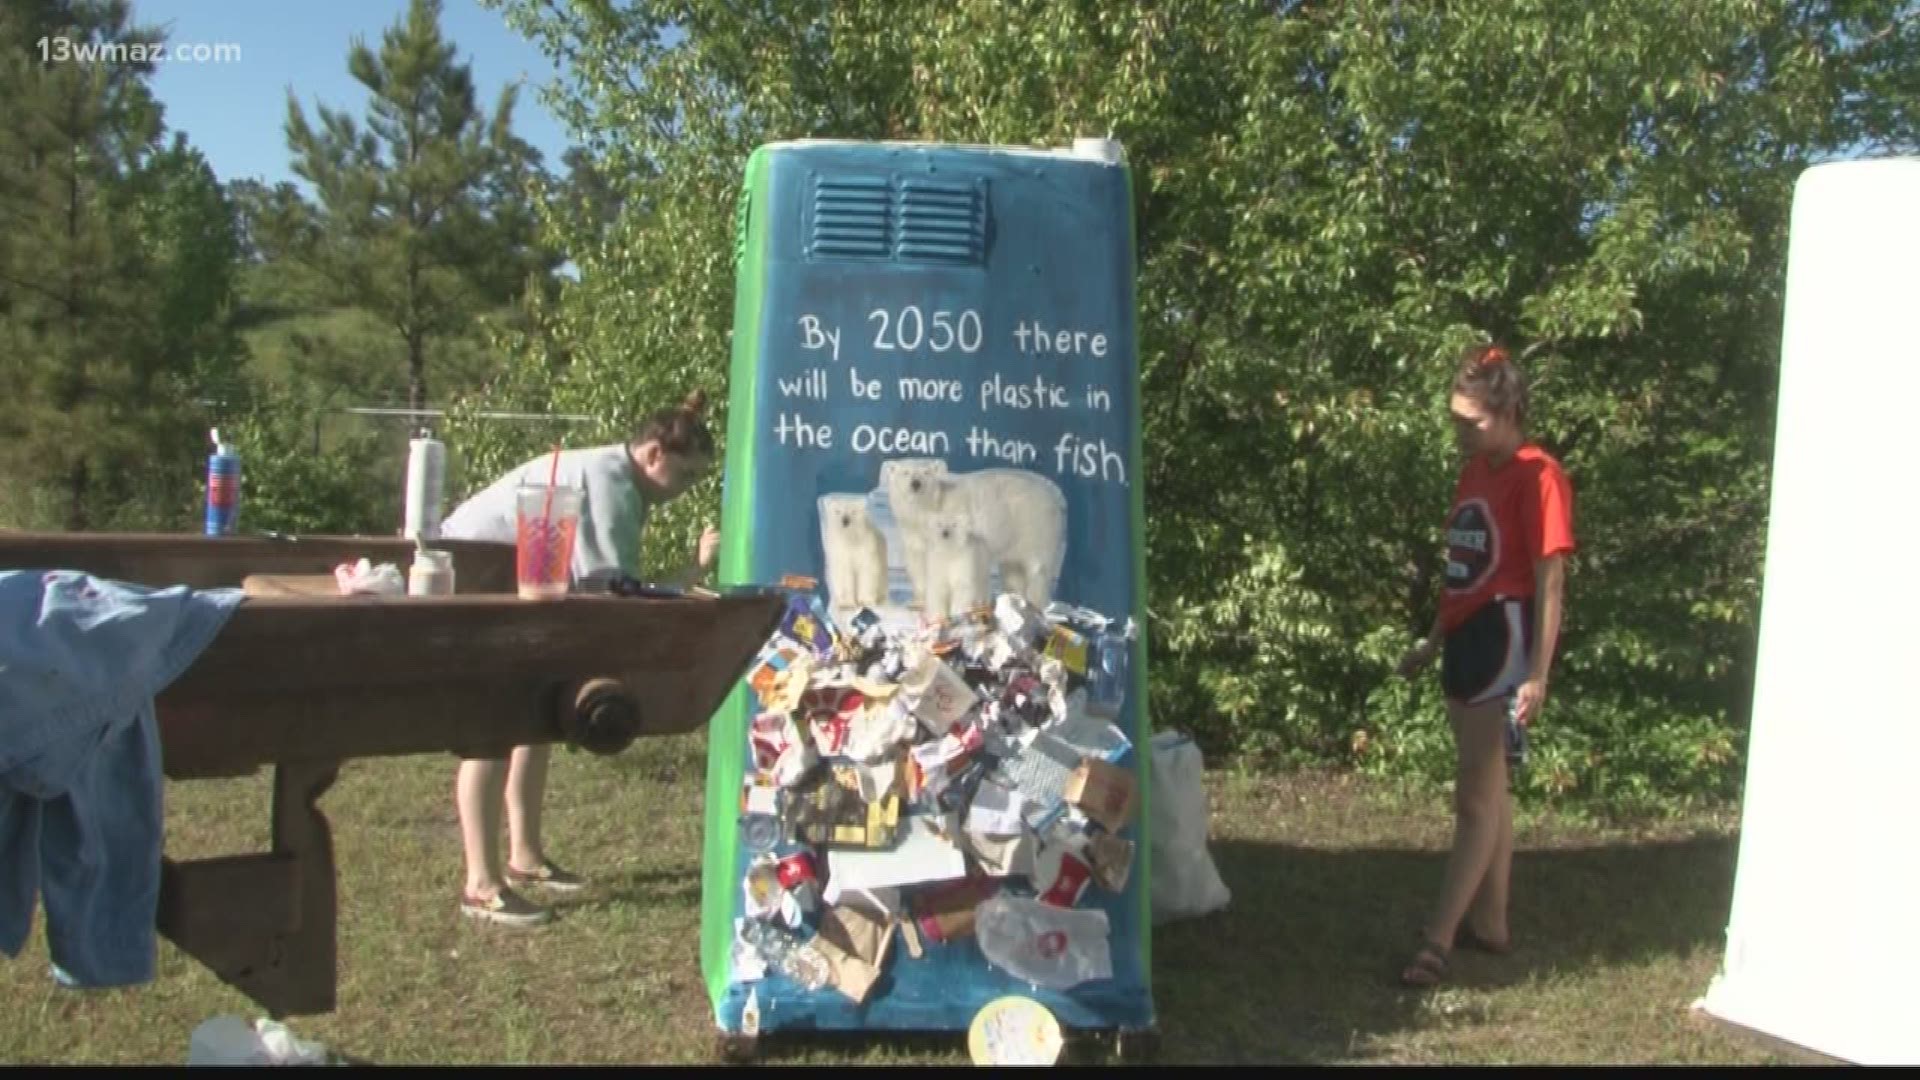 Over the last couple of weeks, Mercer students spent hours painting Porta-Potties in a partnership with a waste disposal company. Their goal is to show teach people how to do their part in protecting the earth.